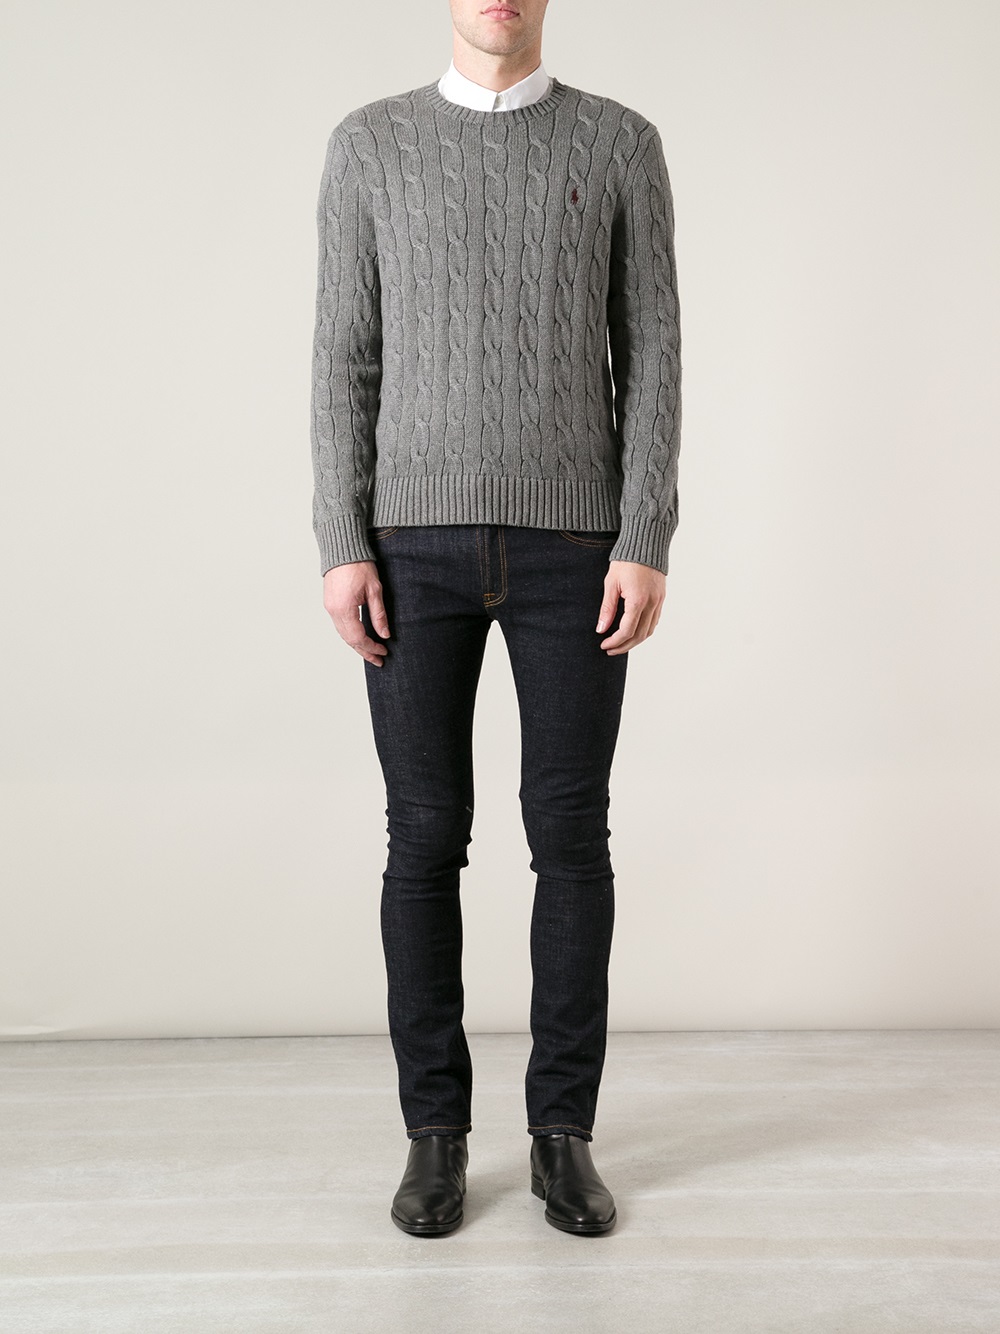 Lyst - Polo Ralph Lauren Cable Knit Sweater in Gray for Men